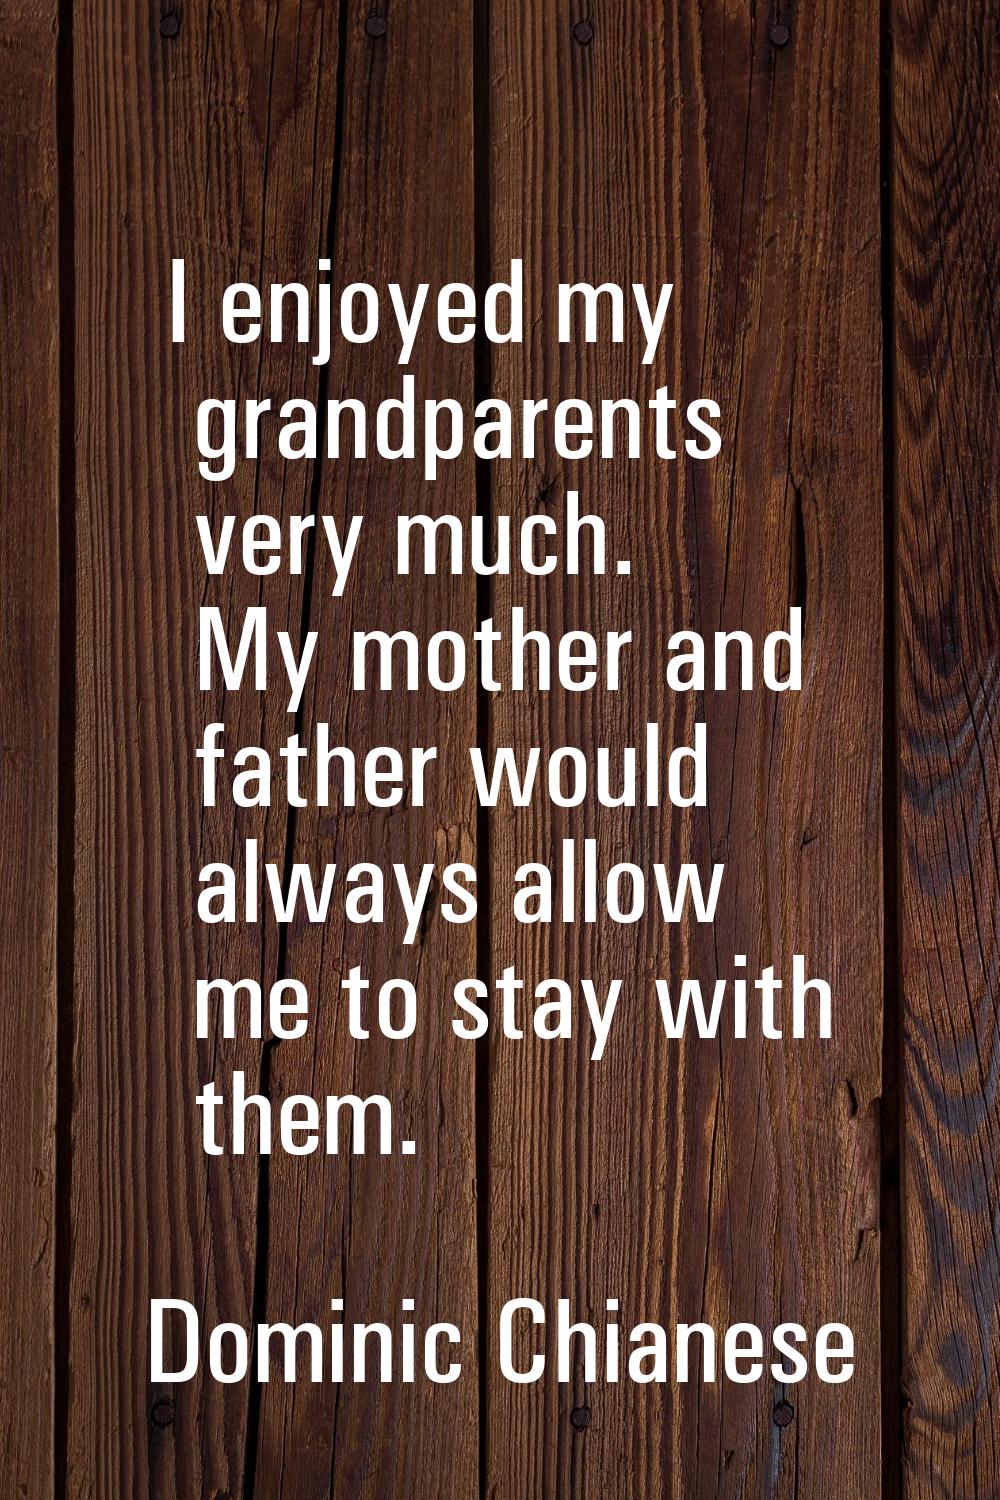 I enjoyed my grandparents very much. My mother and father would always allow me to stay with them.